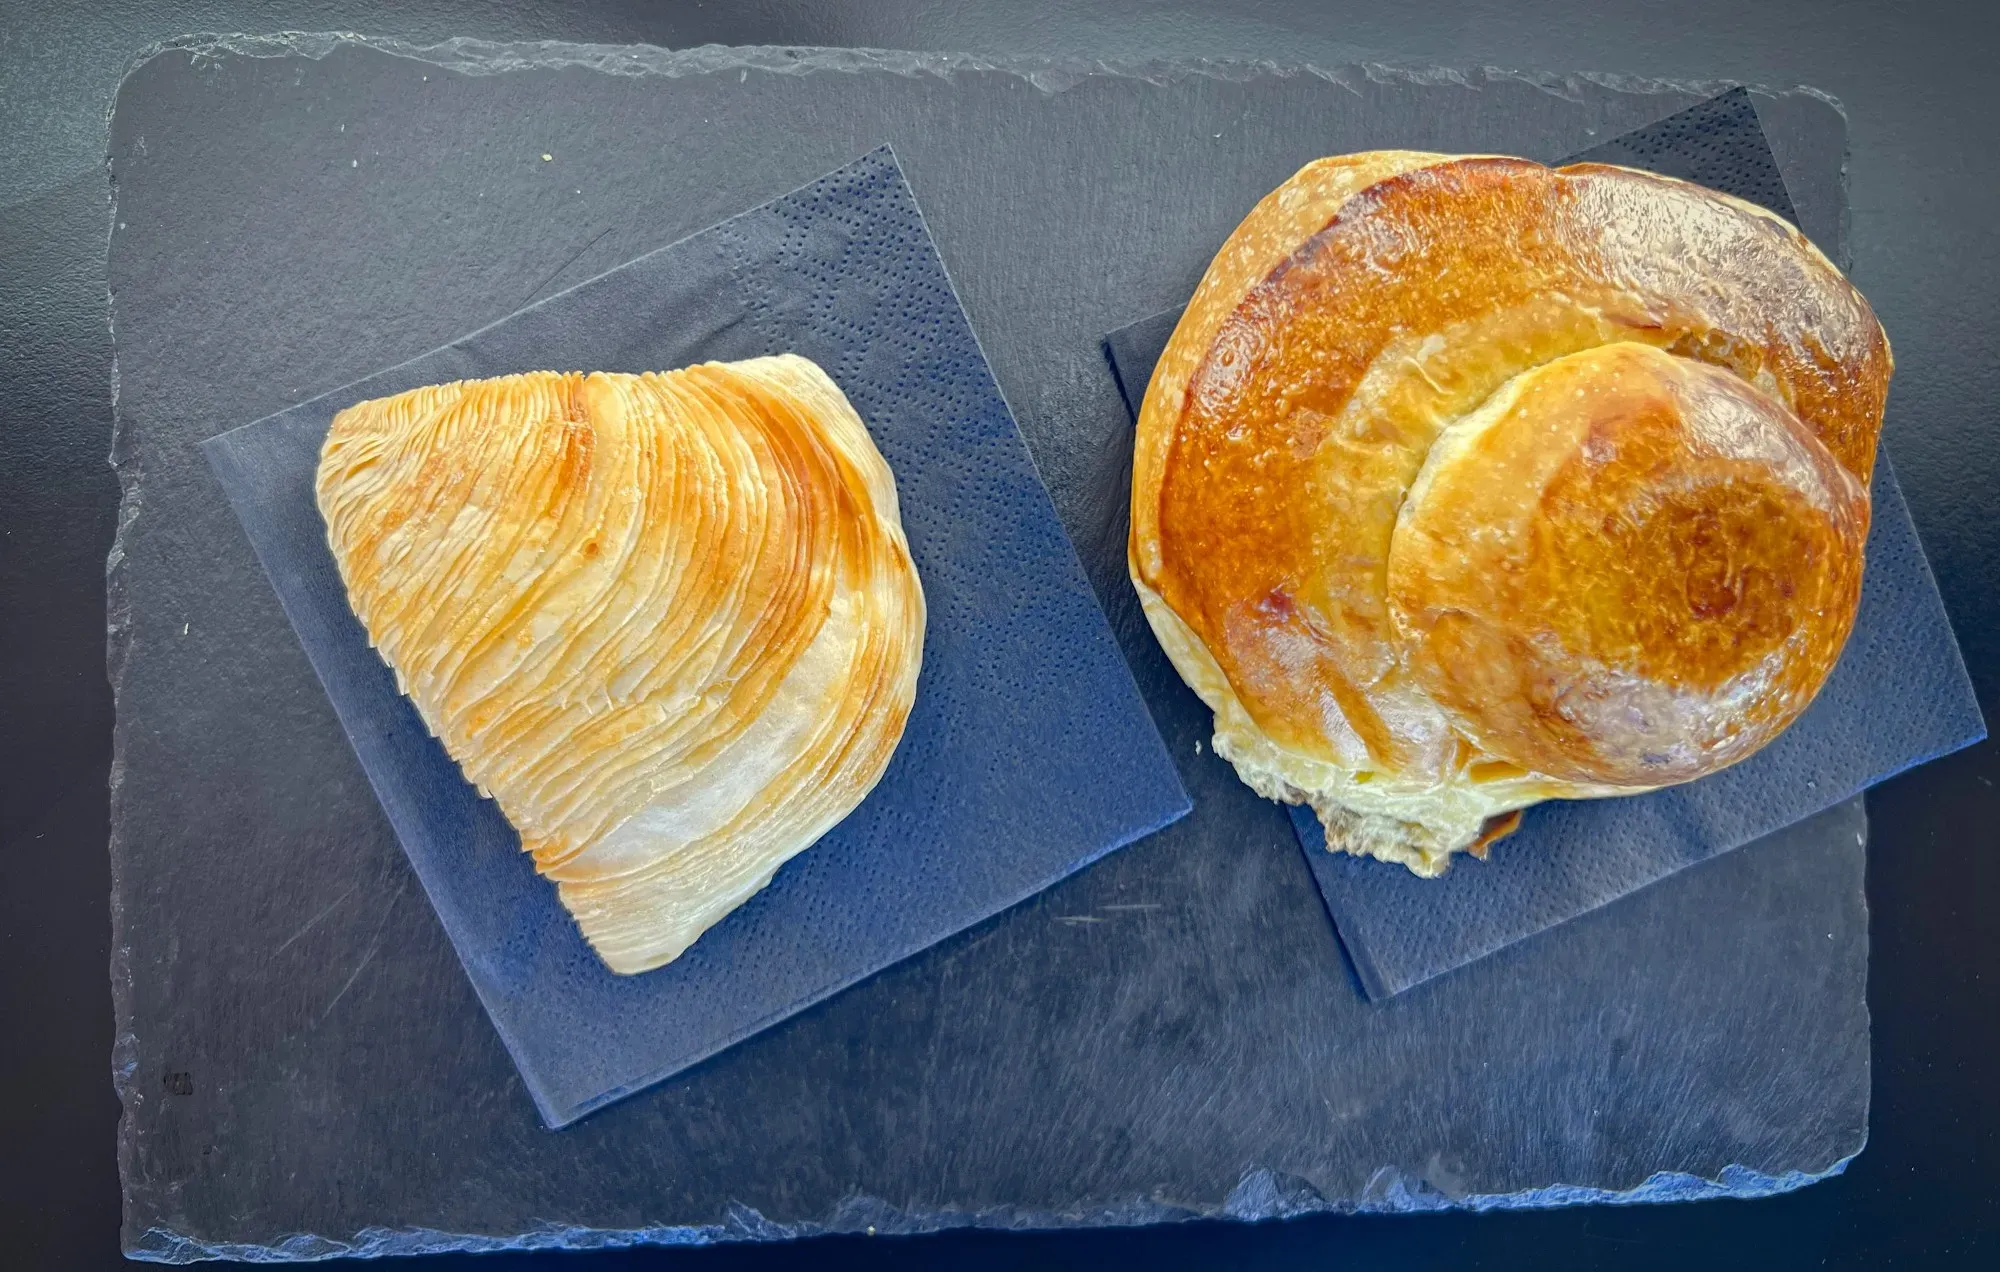 Two types of Sfogliatella. An overhead shot of Sfogliatella Riccia on the left, and Sfogliatella Frolla on the right.